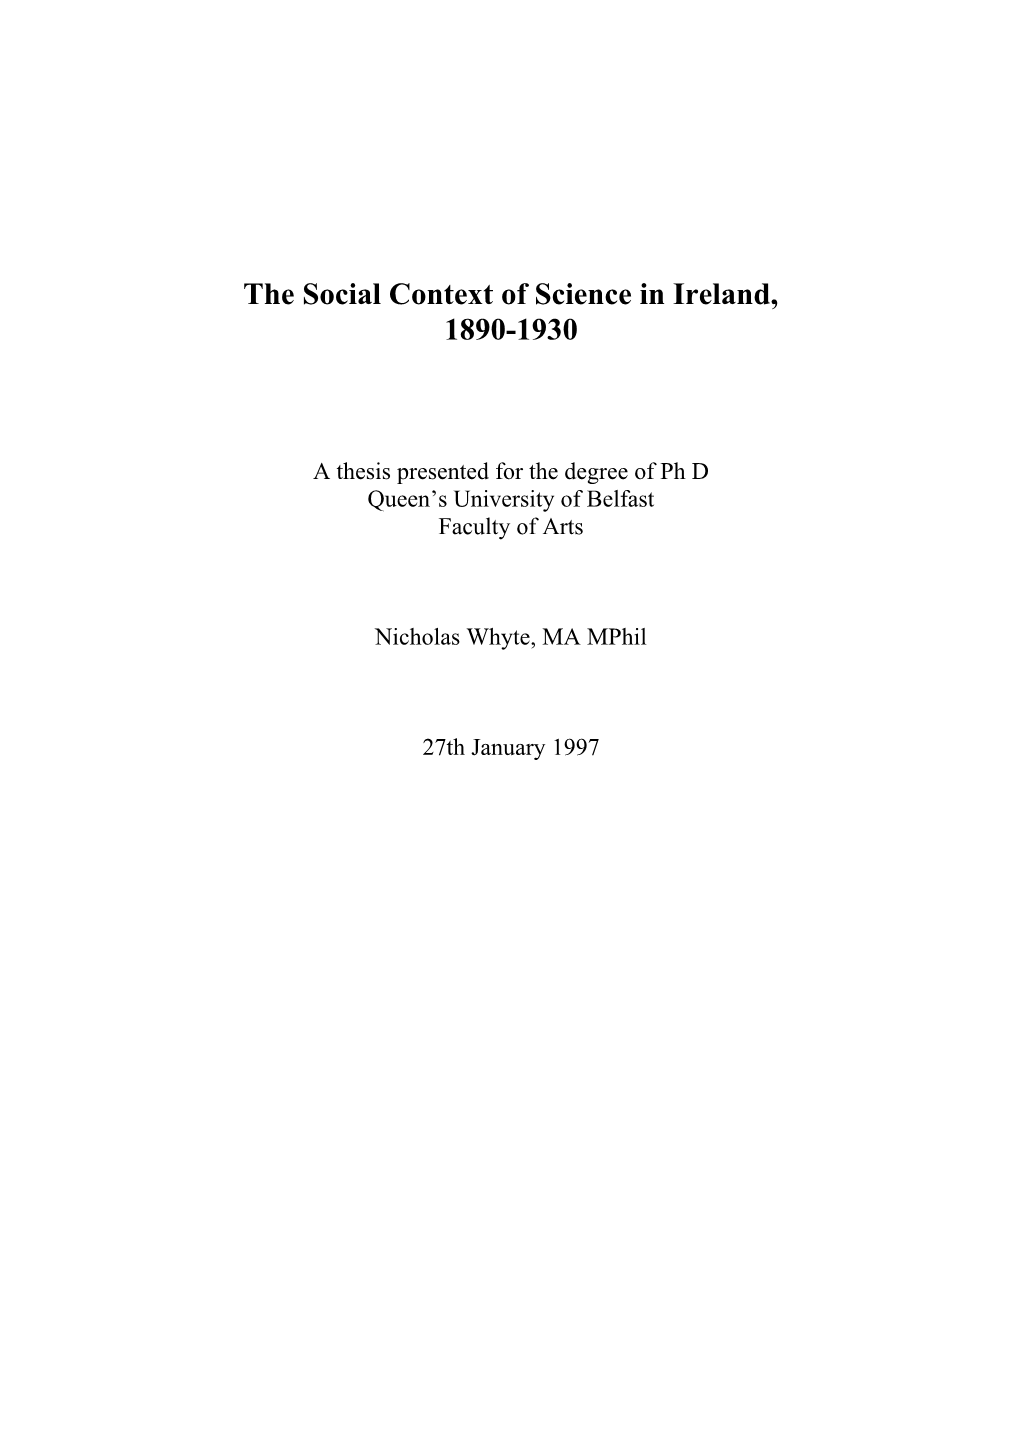 The Social Context of Science in Ireland